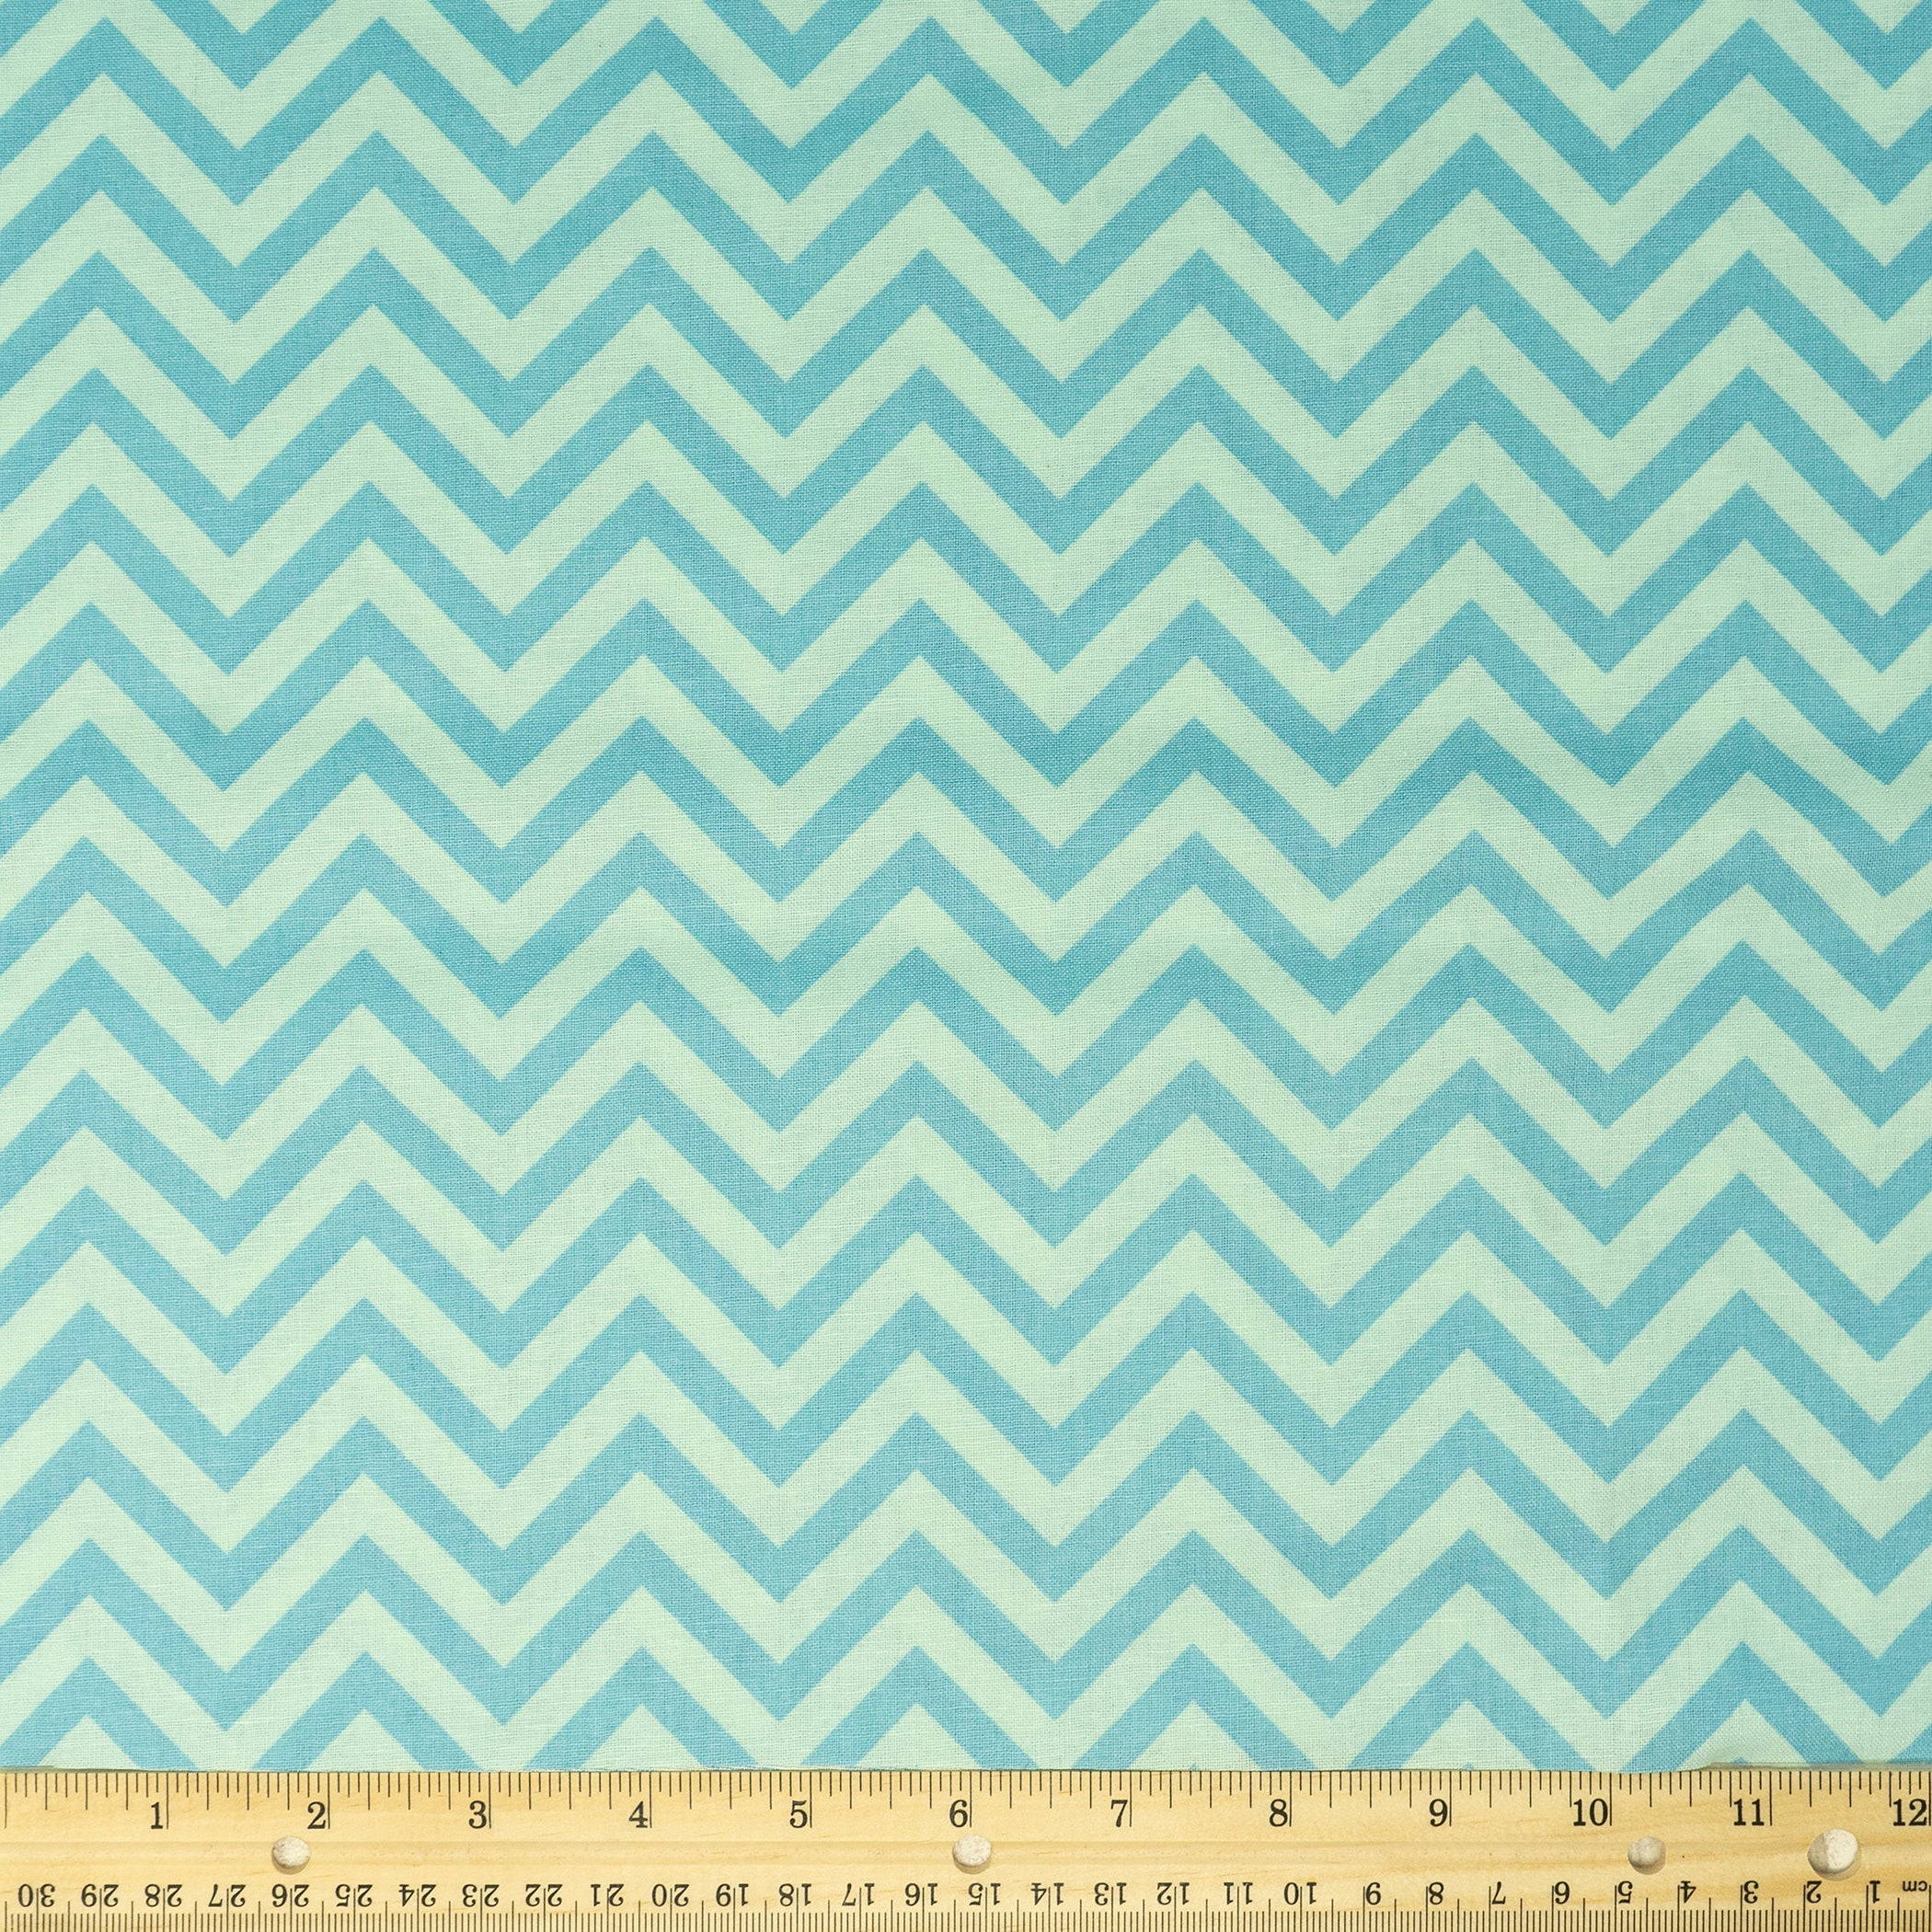 Waverly Inspirations Cotton 44" Zigzag Blue Color Sewing Fabric by the Yard